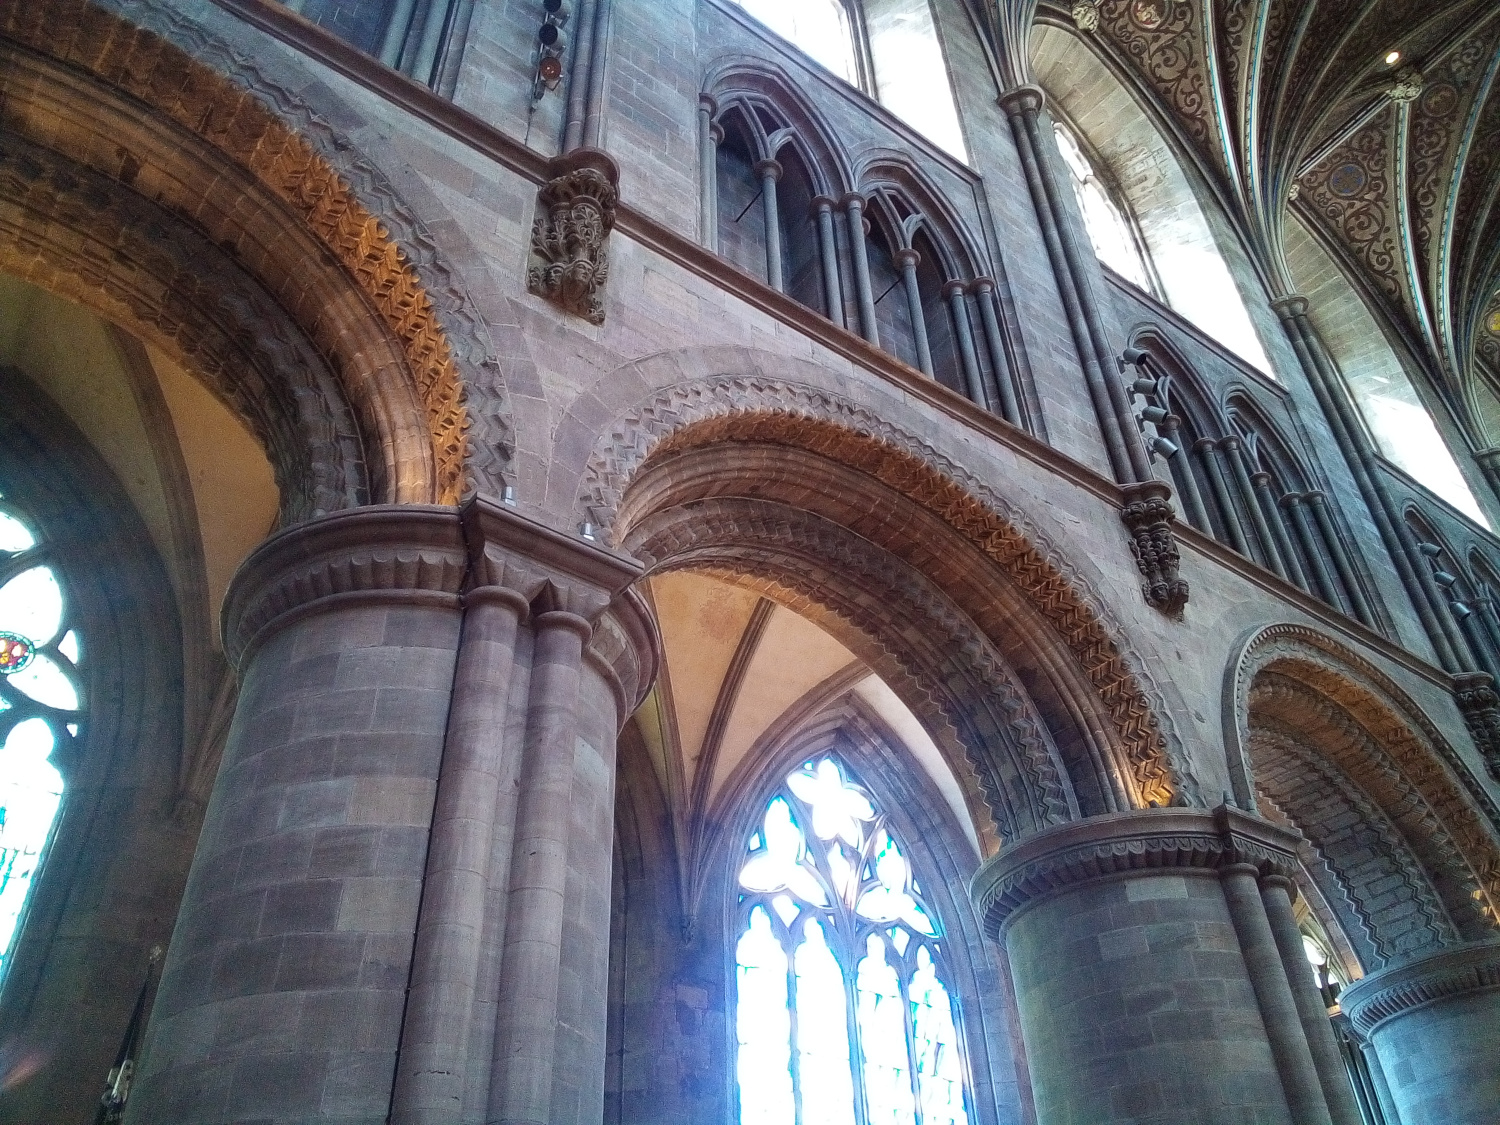 doogee s40 review camera sample cathedral interior